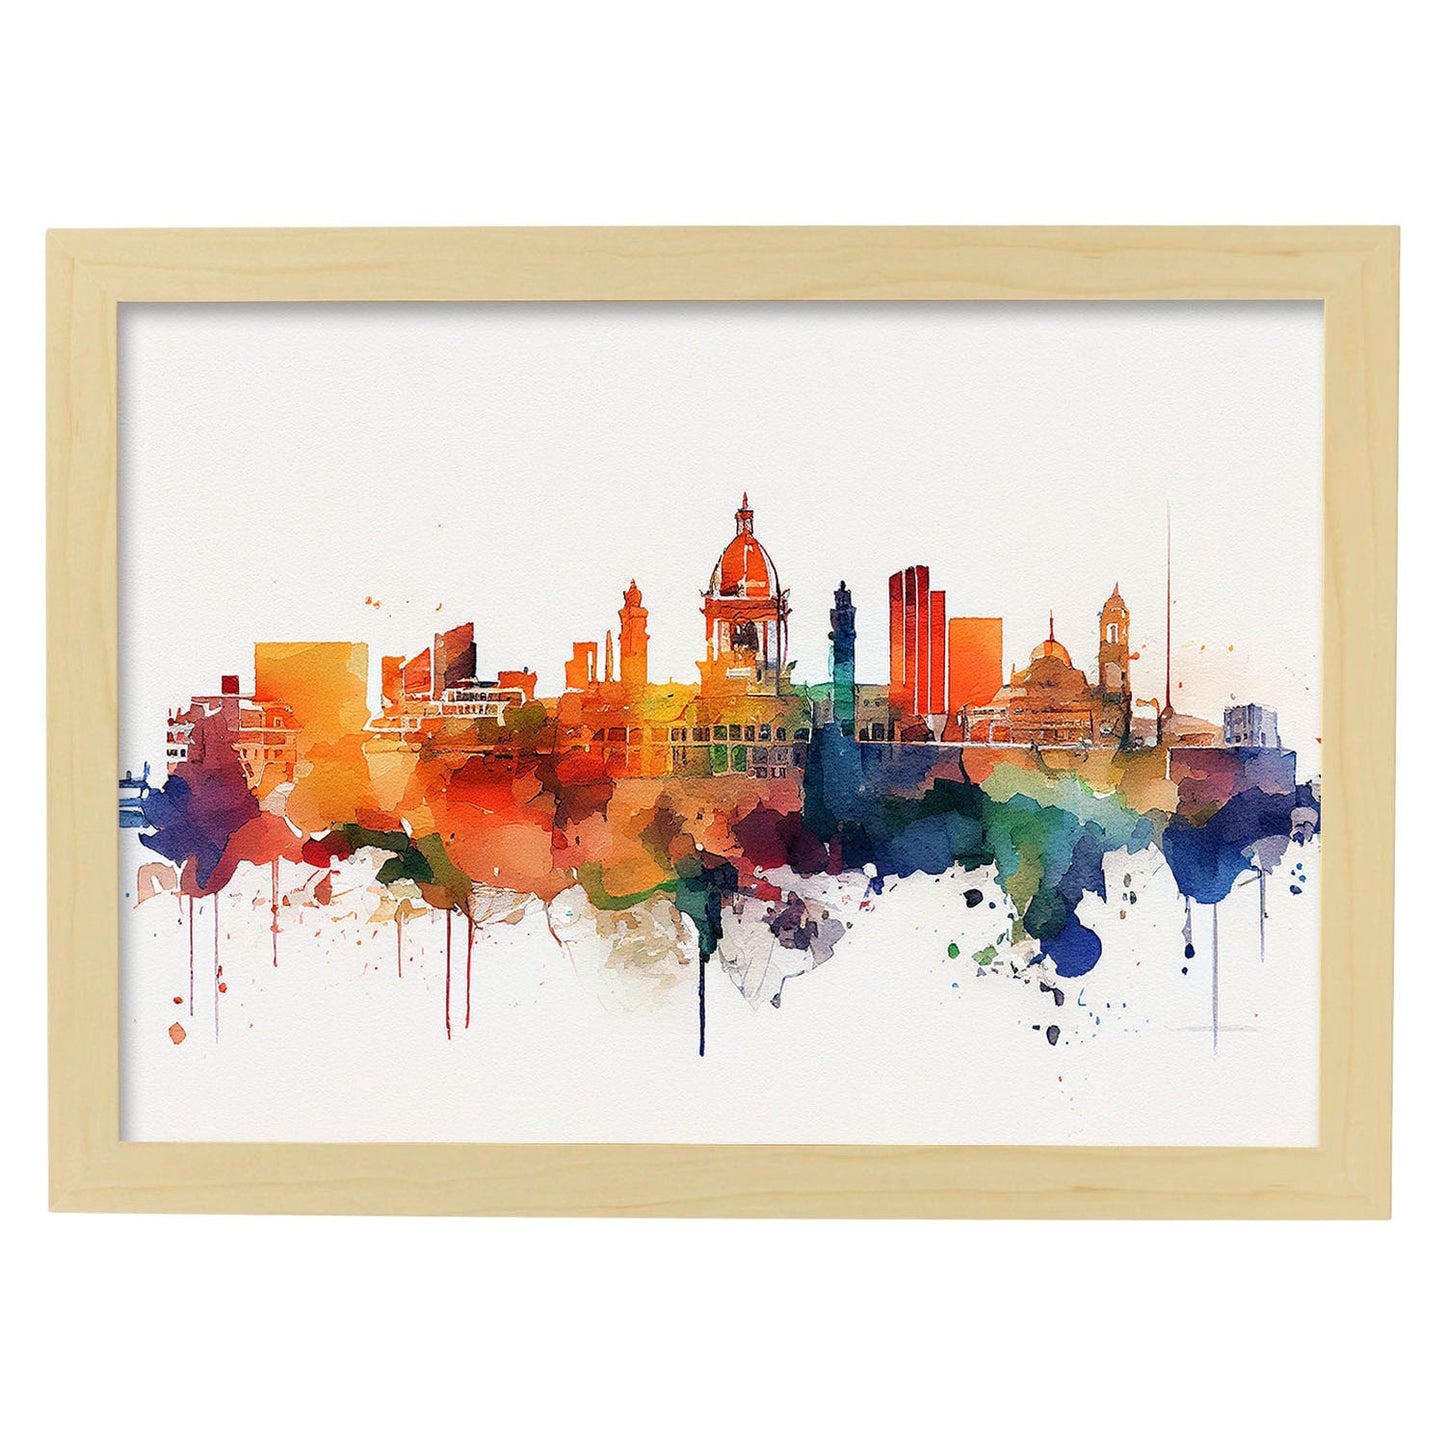 Nacnic watercolor of a skyline of the city of Valencia_2. Aesthetic Wall Art Prints for Bedroom or Living Room Design.-Artwork-Nacnic-A4-Marco Madera Clara-Nacnic Estudio SL